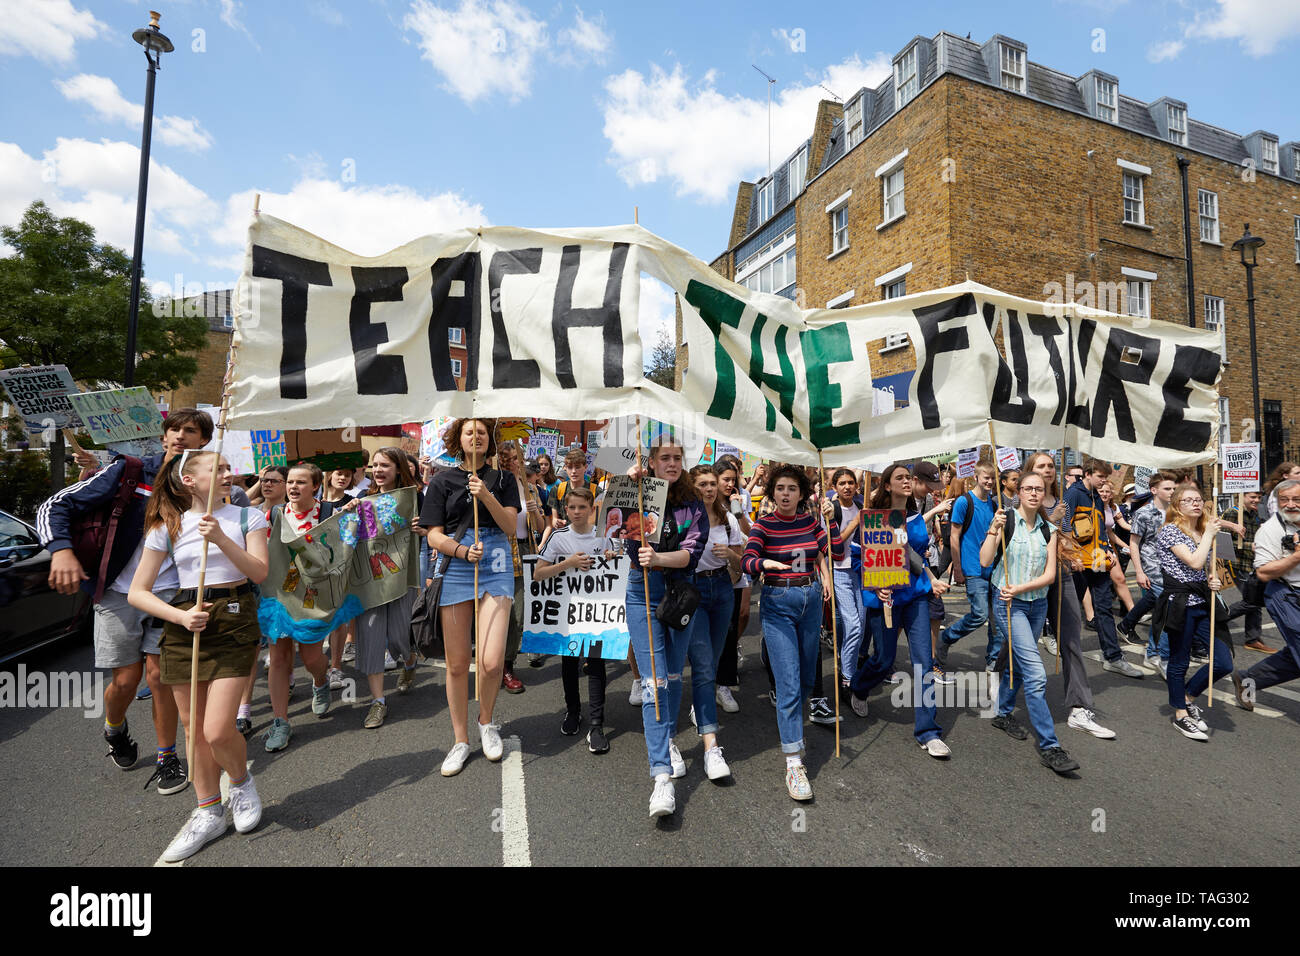 London, U.K. - 24 May, 2019: Young people demonstrate through central London against global warming, part of the Youth Strike 4 Climate movement. Stock Photo